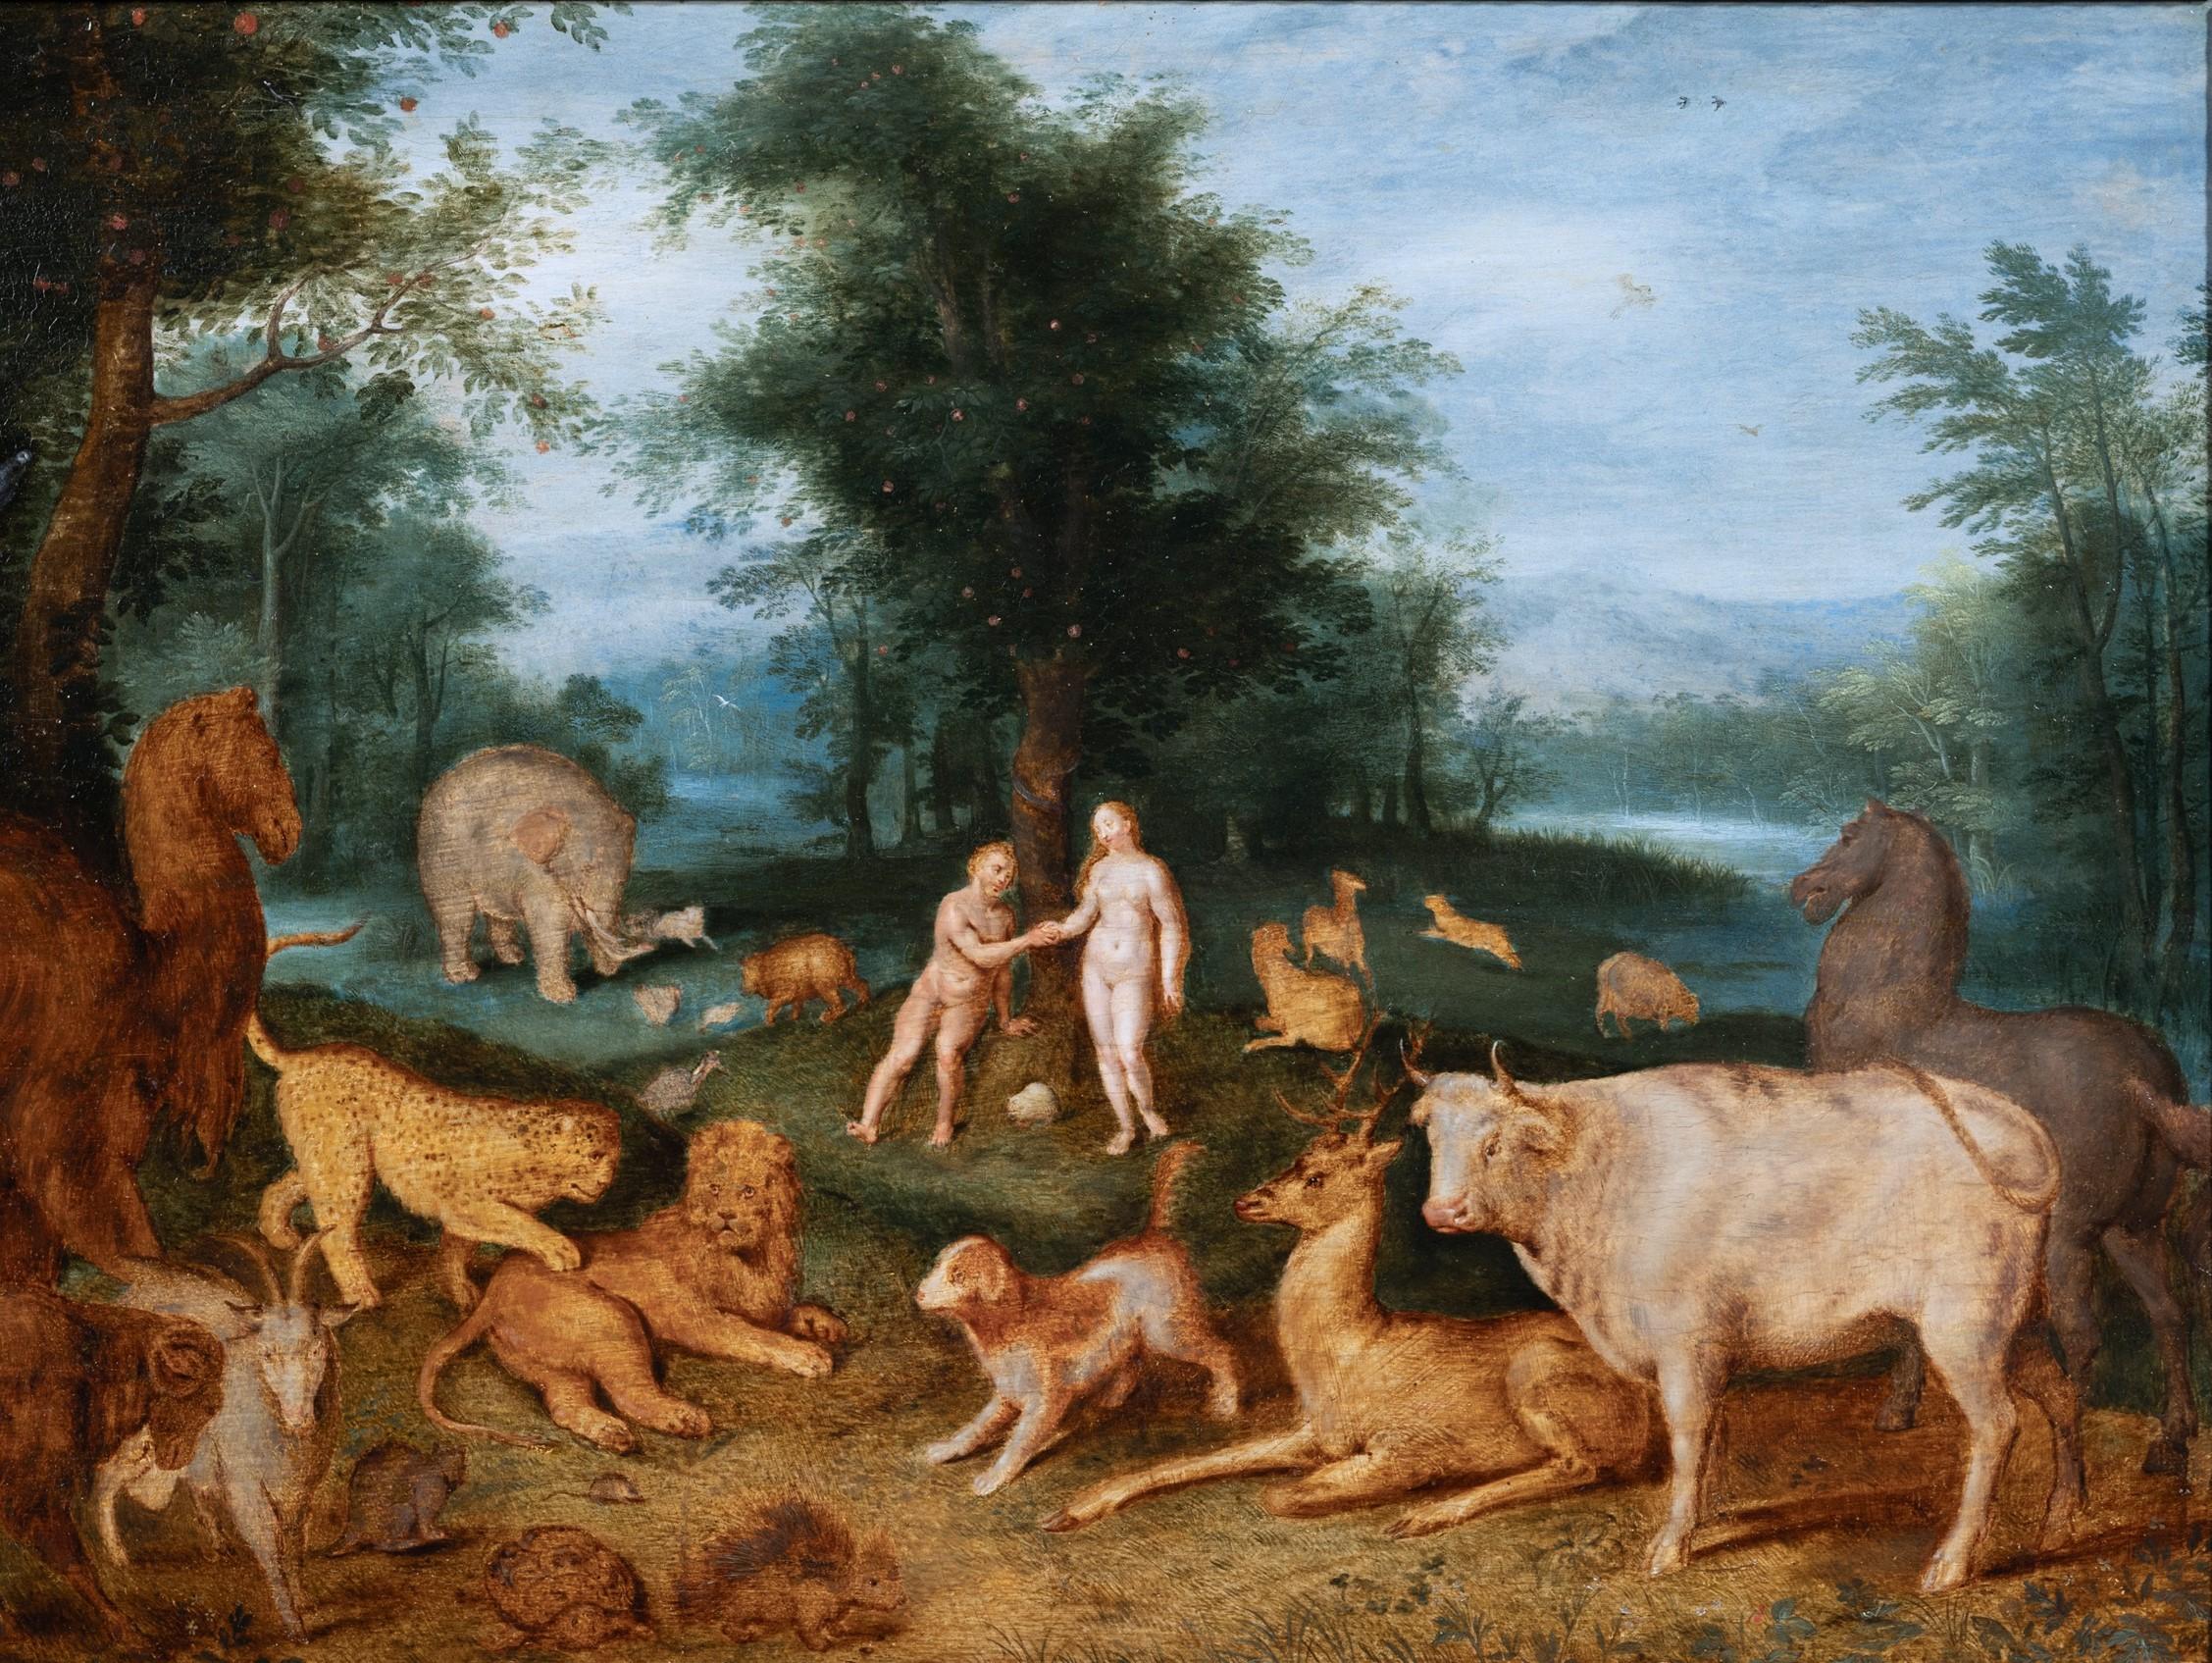 Adam and Eve in paradise, studio of Jan Brueghel the Younger, 17th century - Painting by Studio of Jan Brueghel the Younger